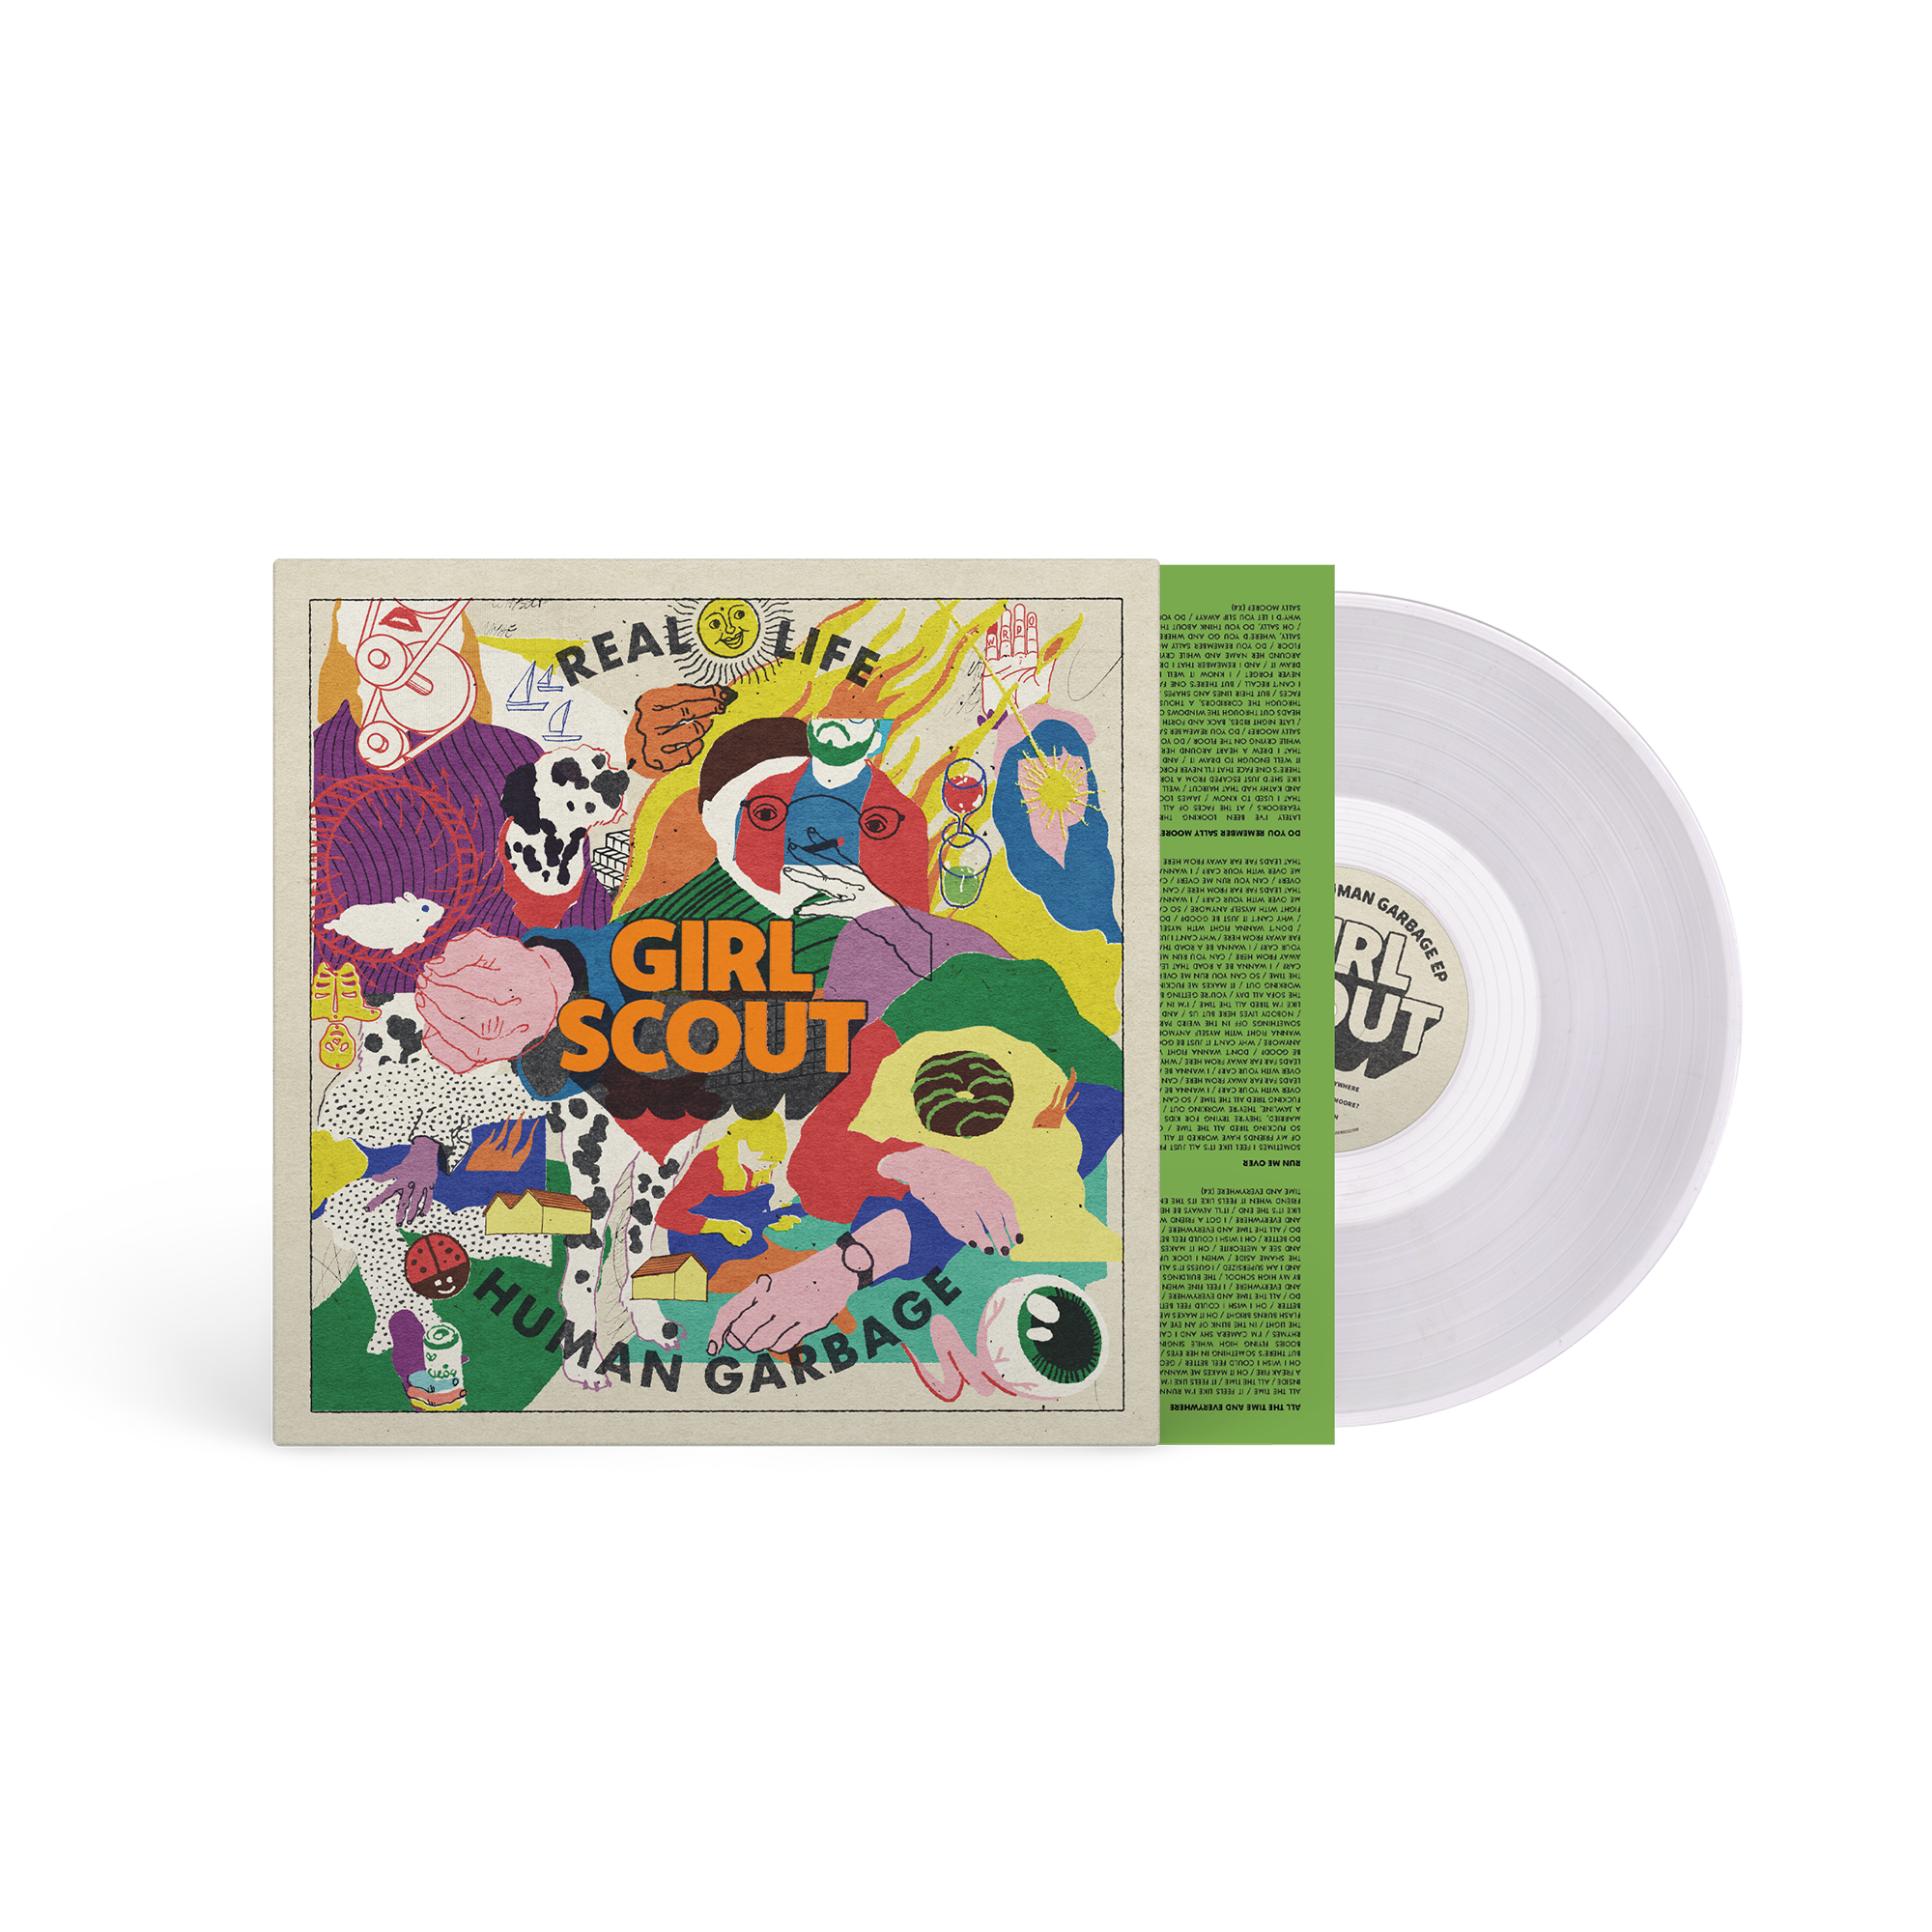 Girl Scout - Real Life Human Garbage / Granny Music: Limited Clear Vinyl LP